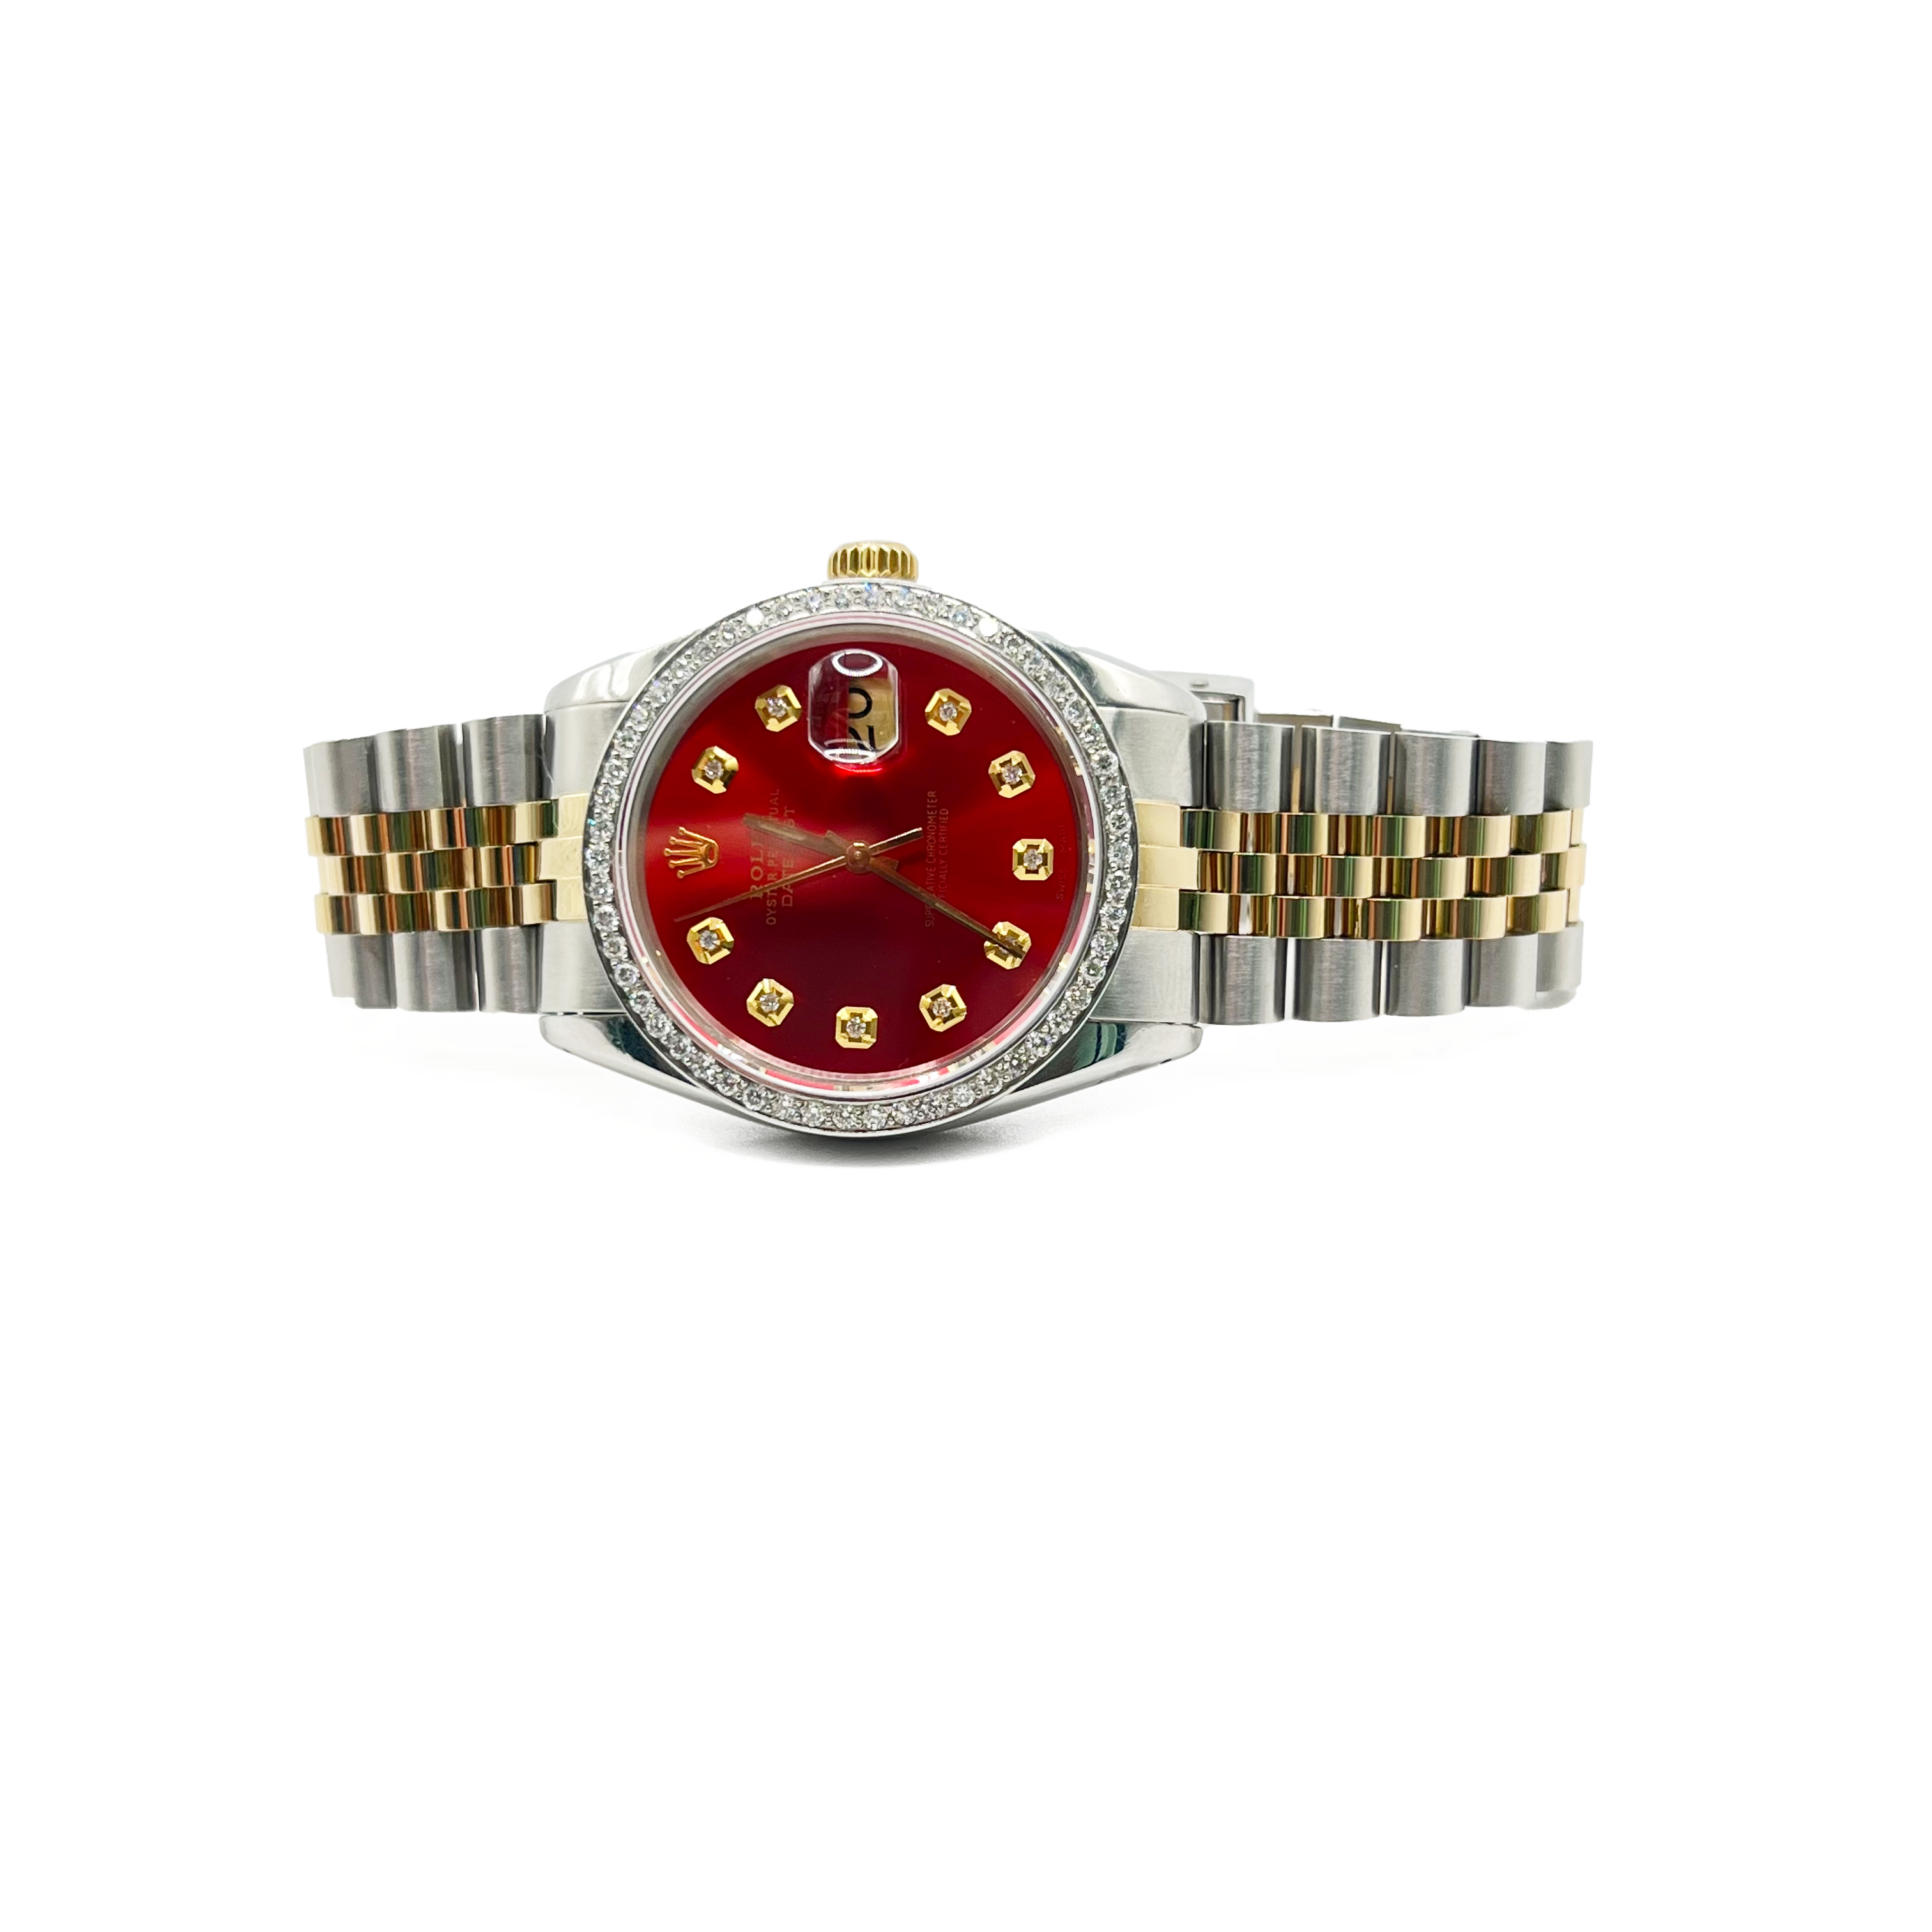 Afgift Seminary Indbildsk 1987 Rolex Date Just - Supreme Jewelers Complimentary 1-4 Day Shipping